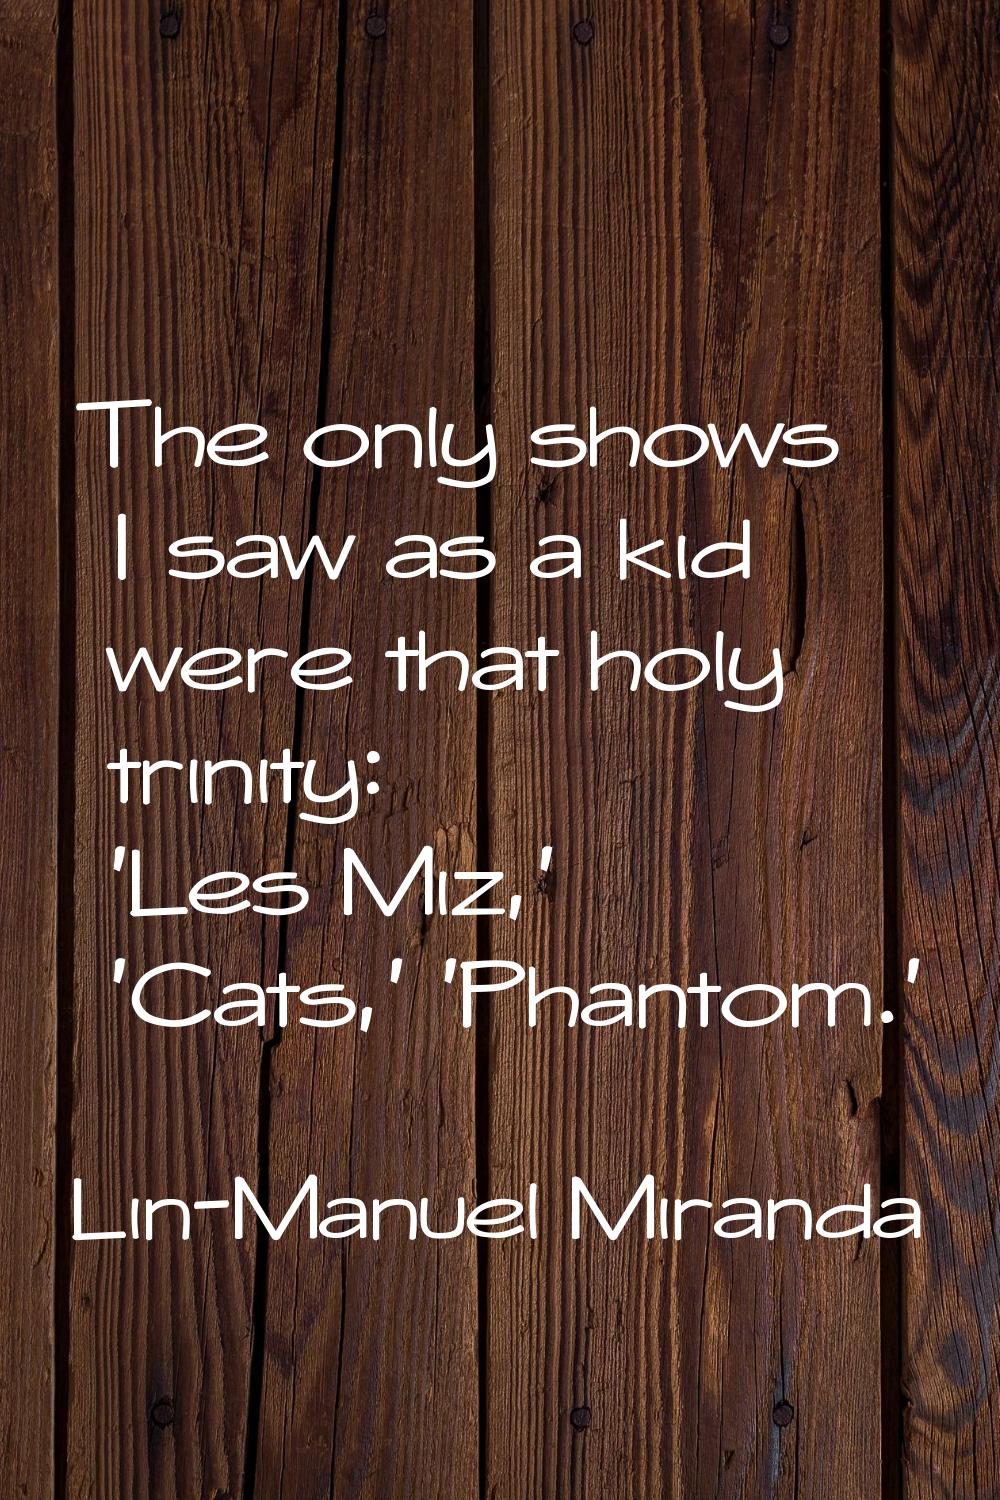 The only shows I saw as a kid were that holy trinity: 'Les Miz,' 'Cats,' 'Phantom.'